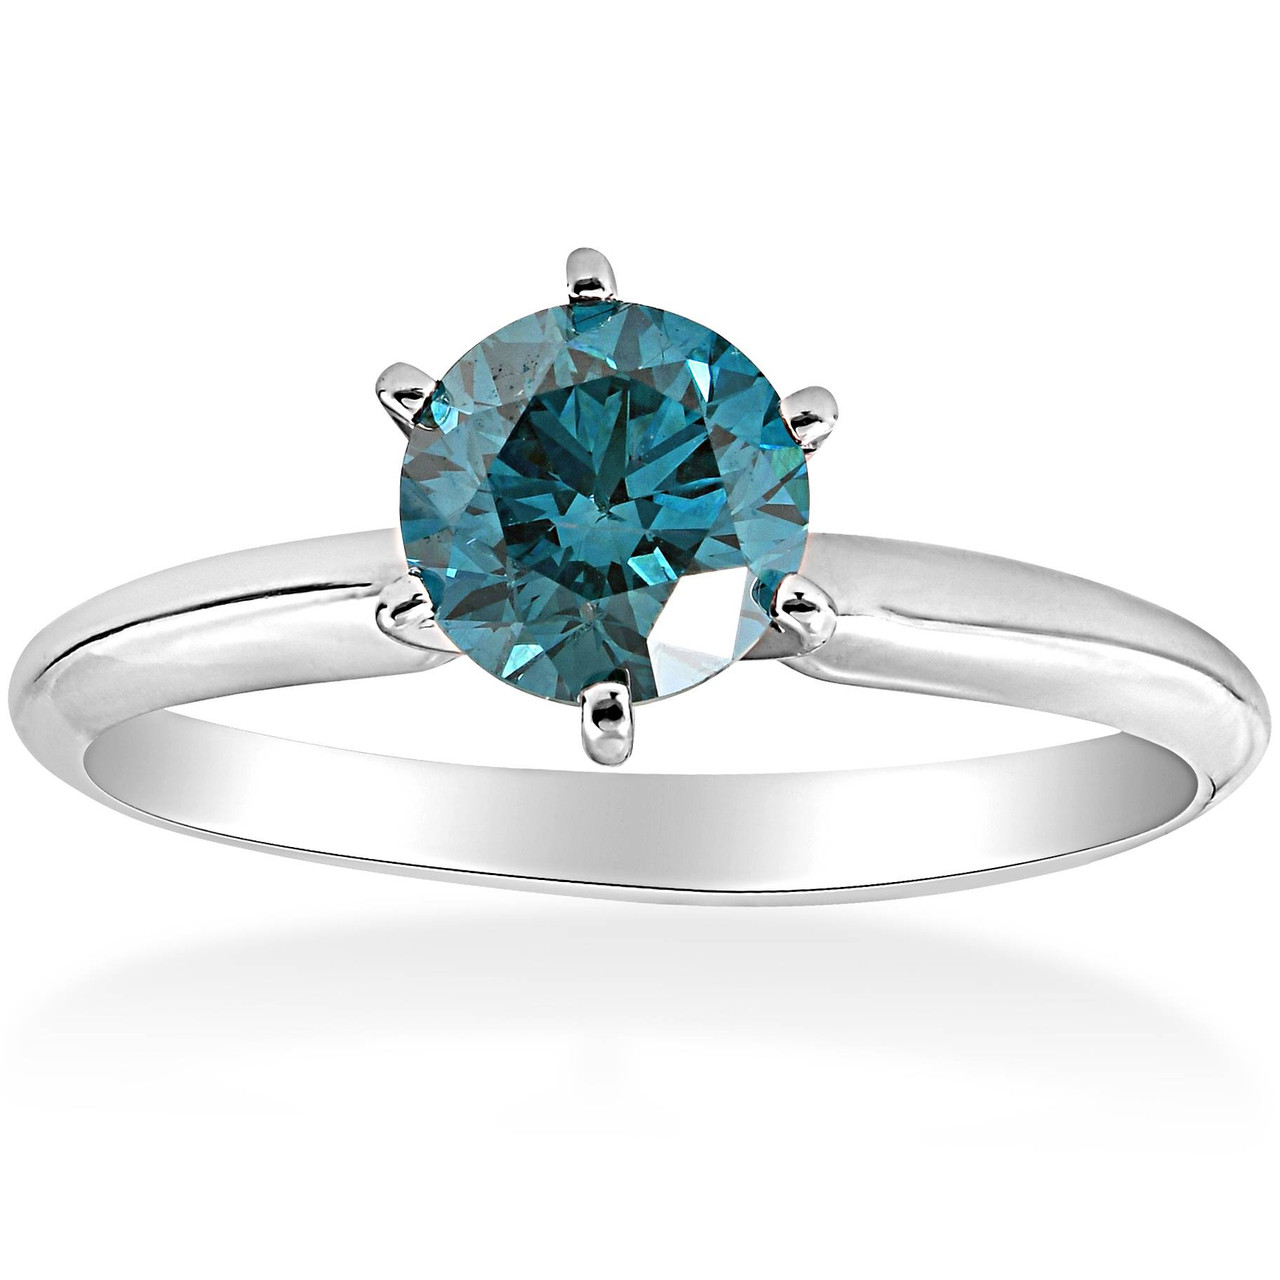 1 1/2ct Blue Diamond Solitaire Engagement Ring 14K White Gold